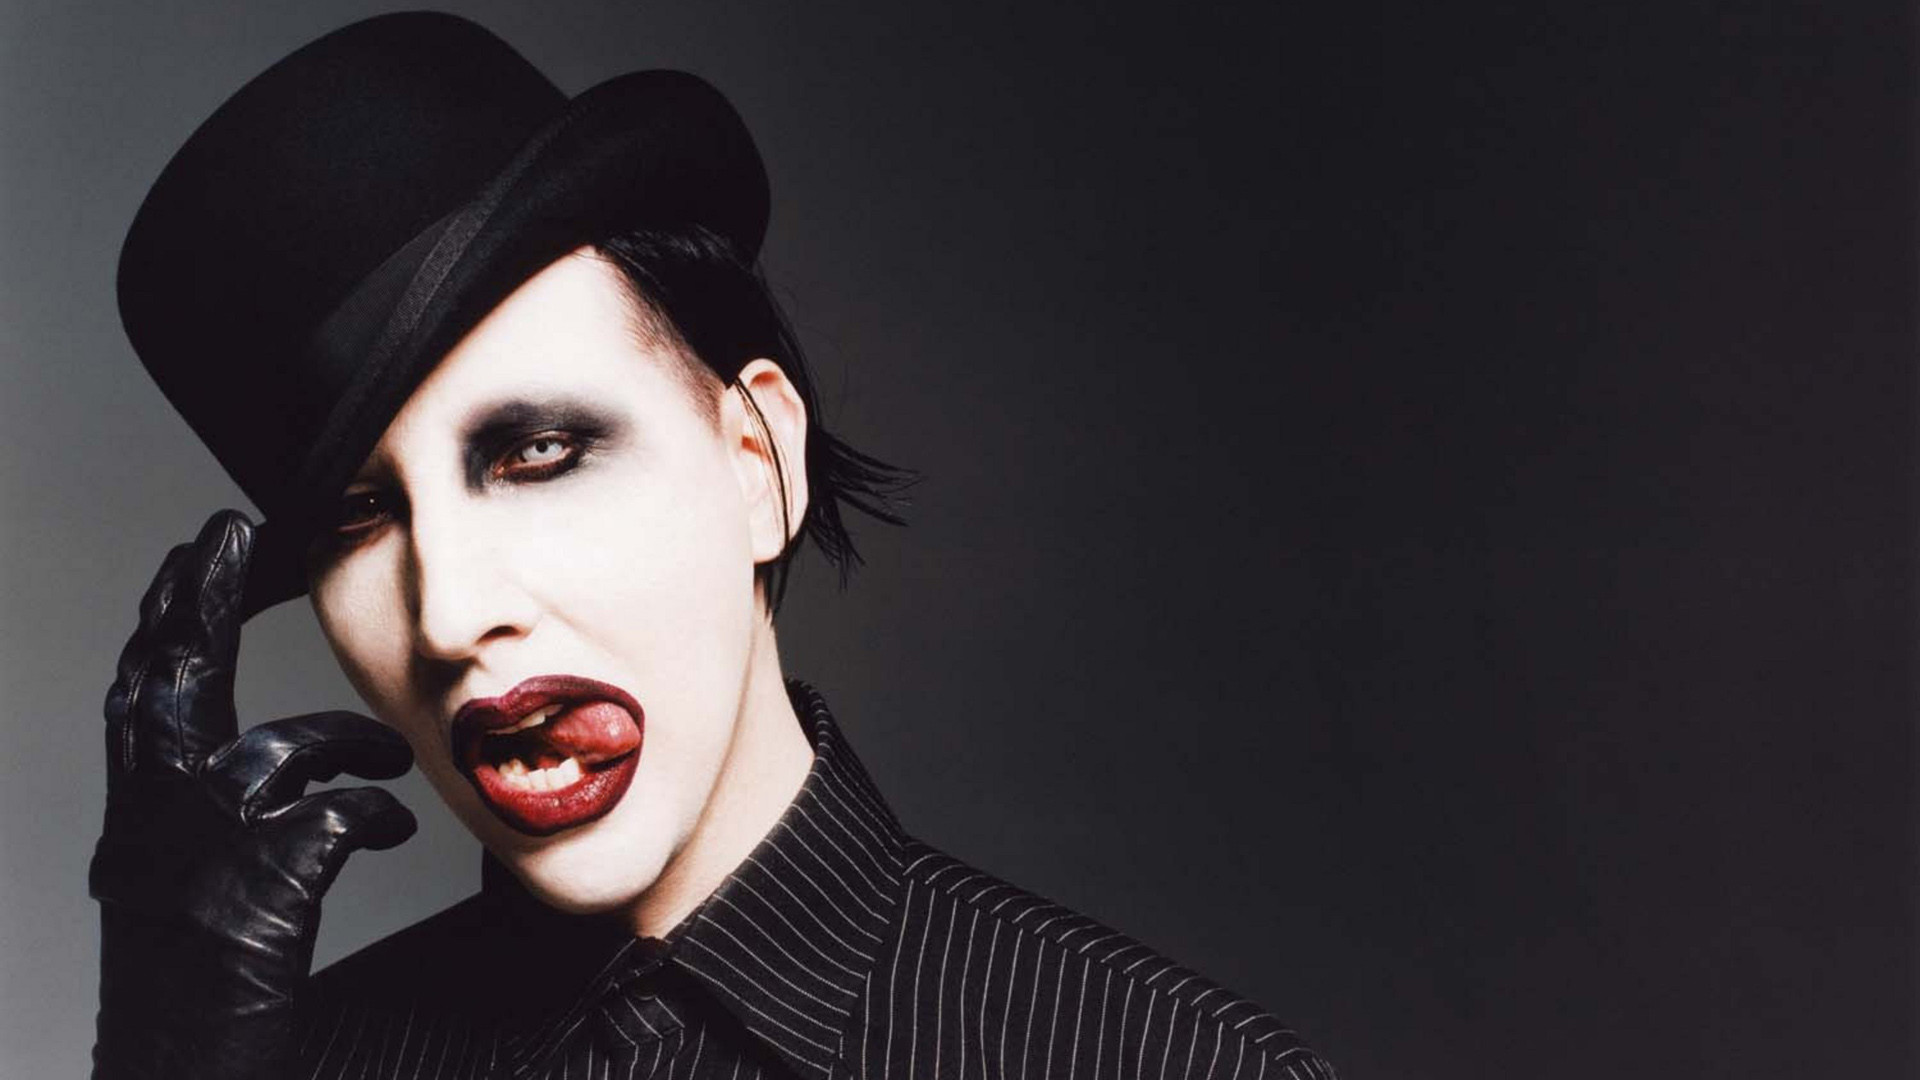 1920x1080 Marilyn Manson Wallpapers - HD Wallpapers 23544 | Download Wallpaper |  Pinterest | Marilyn manson and Wallpaper